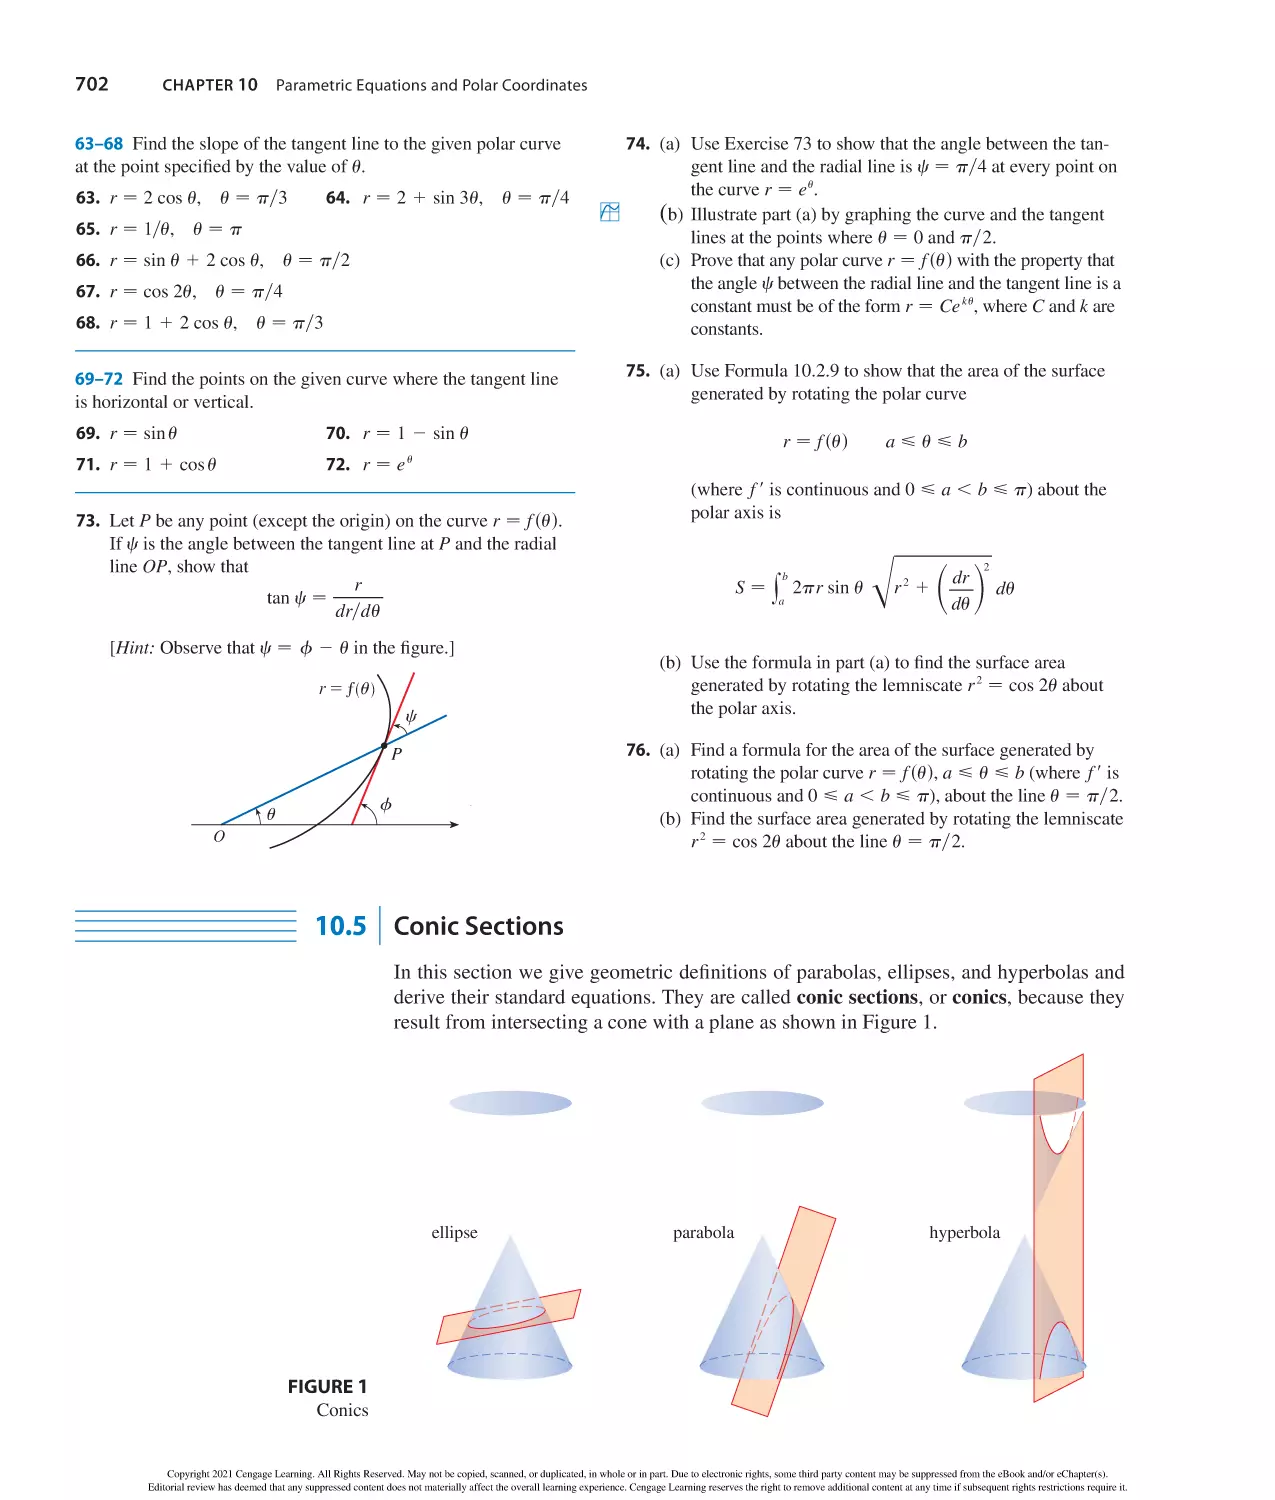 10.5 Conic Sections